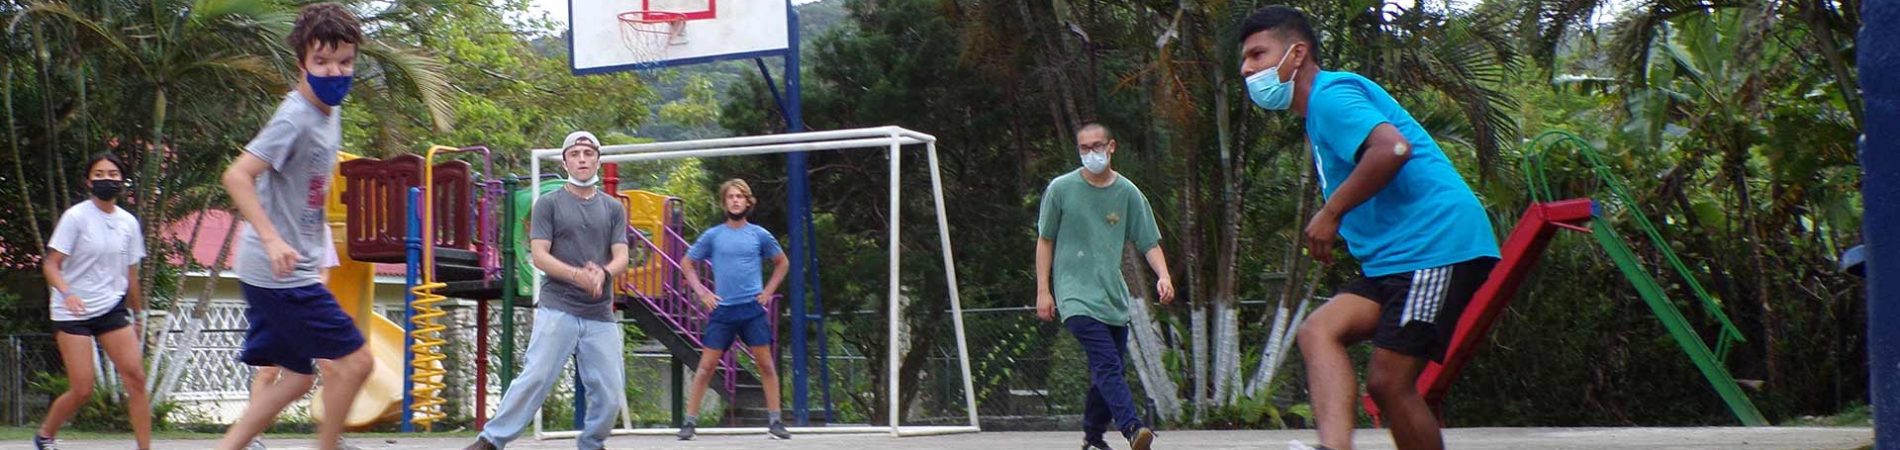 students playing soccer with masks on